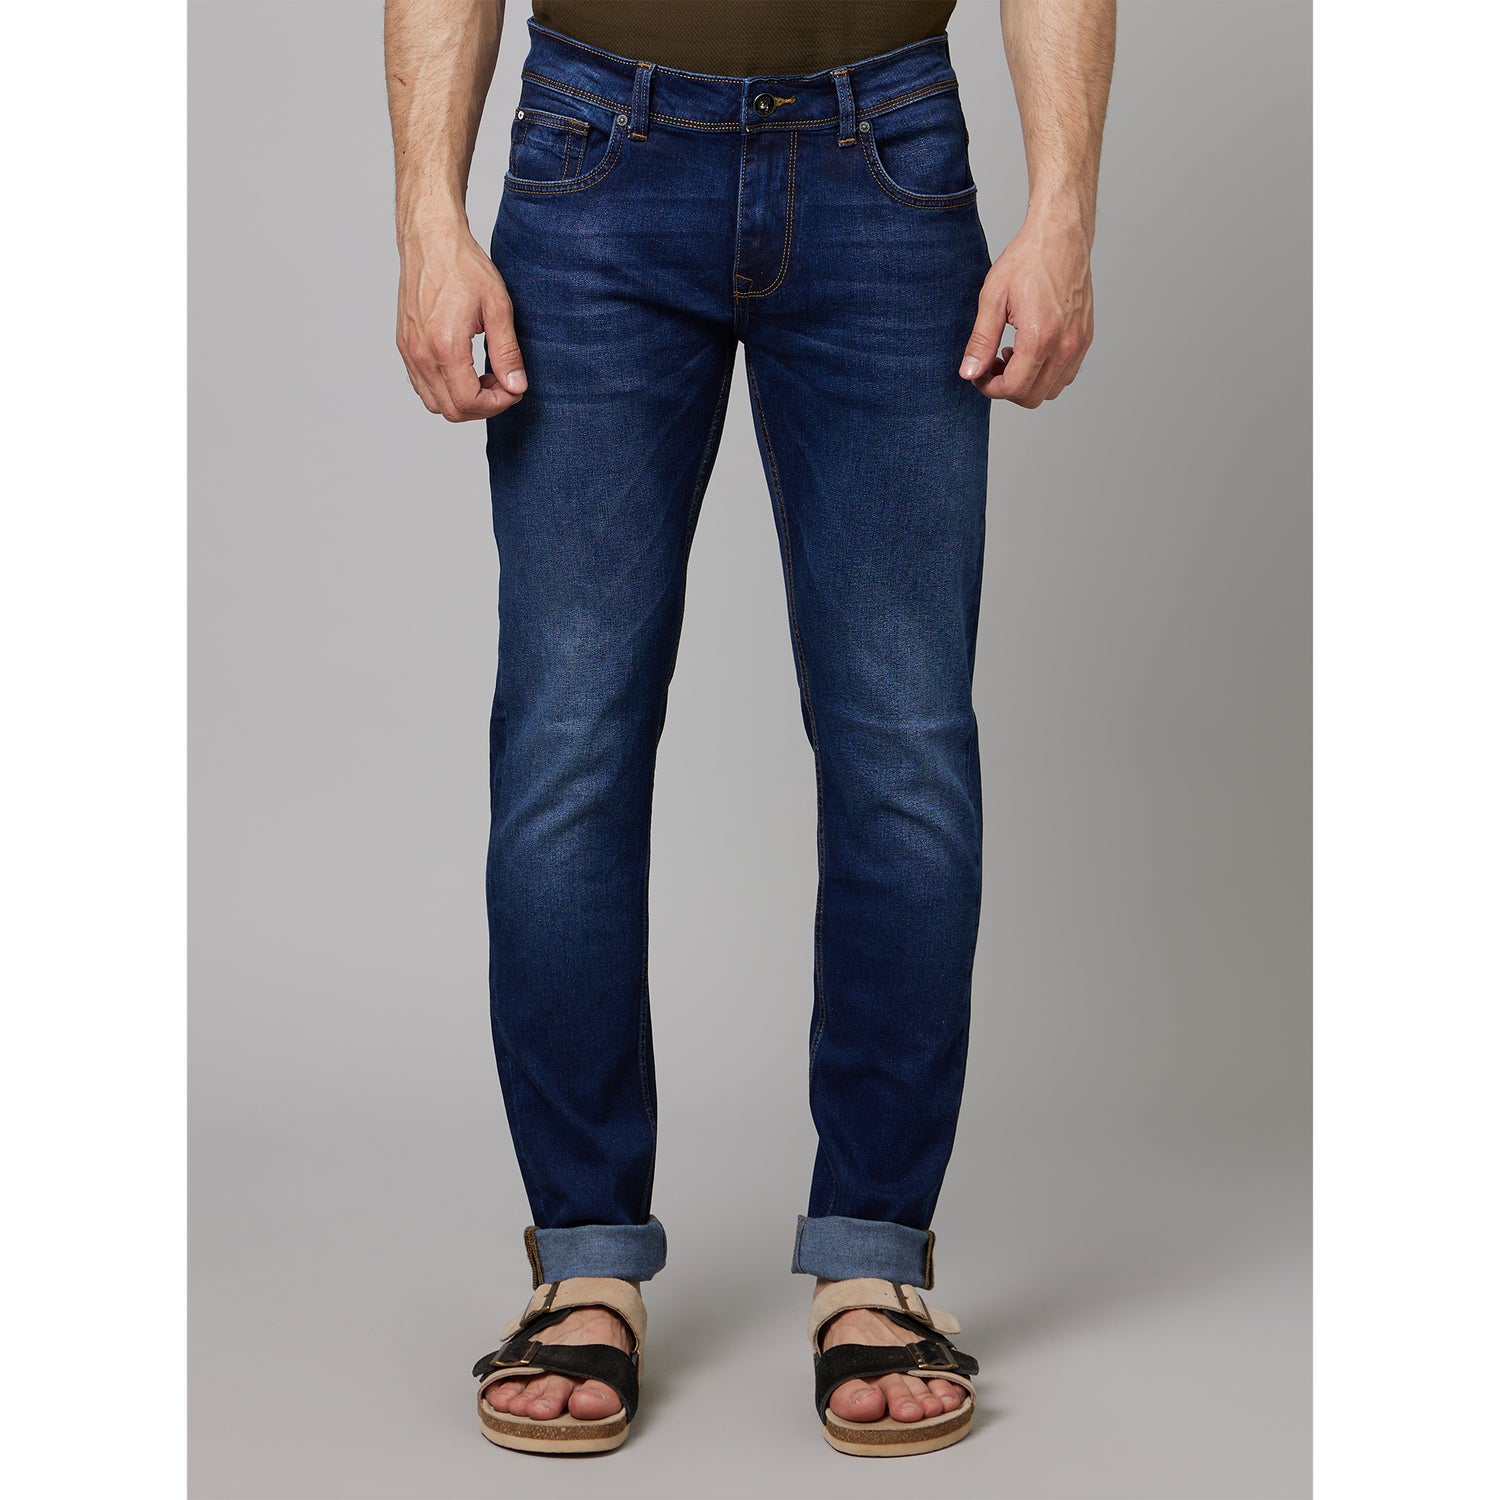 Navy Blue Light Fade Clean Look Stretchable Jeans (COECODRY225)